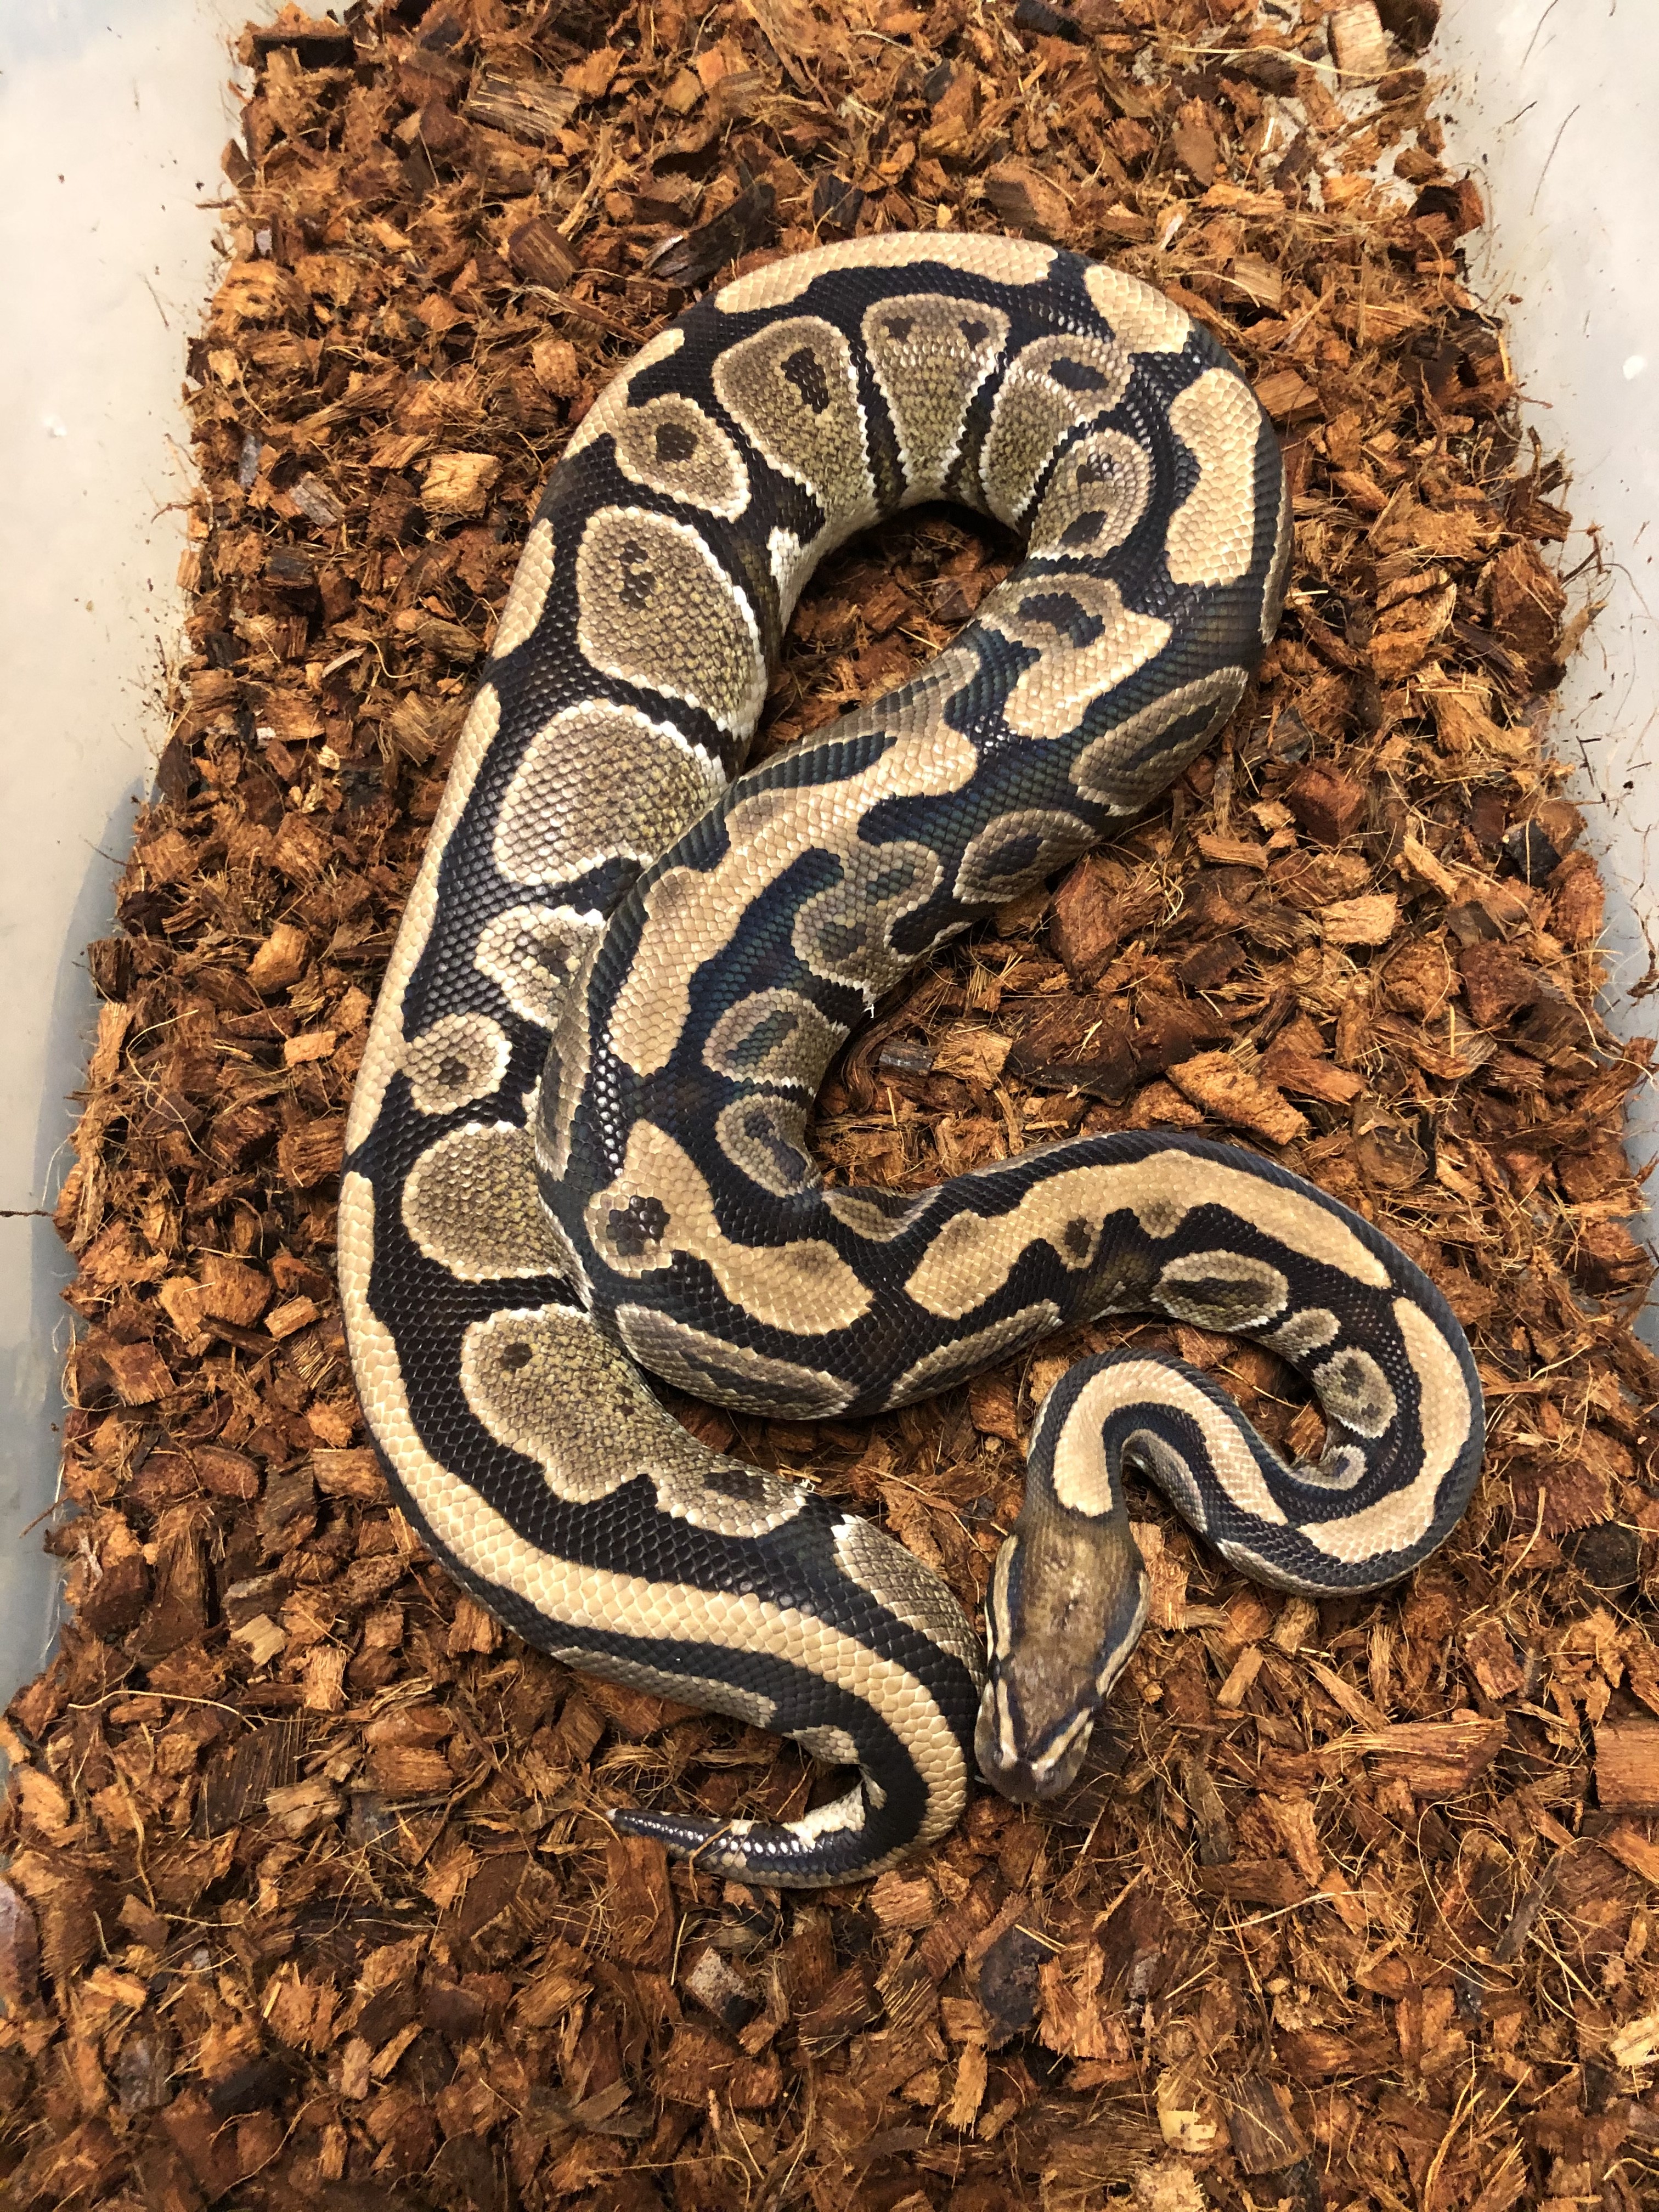 Specter Ball Python by Muddywater Reptiles